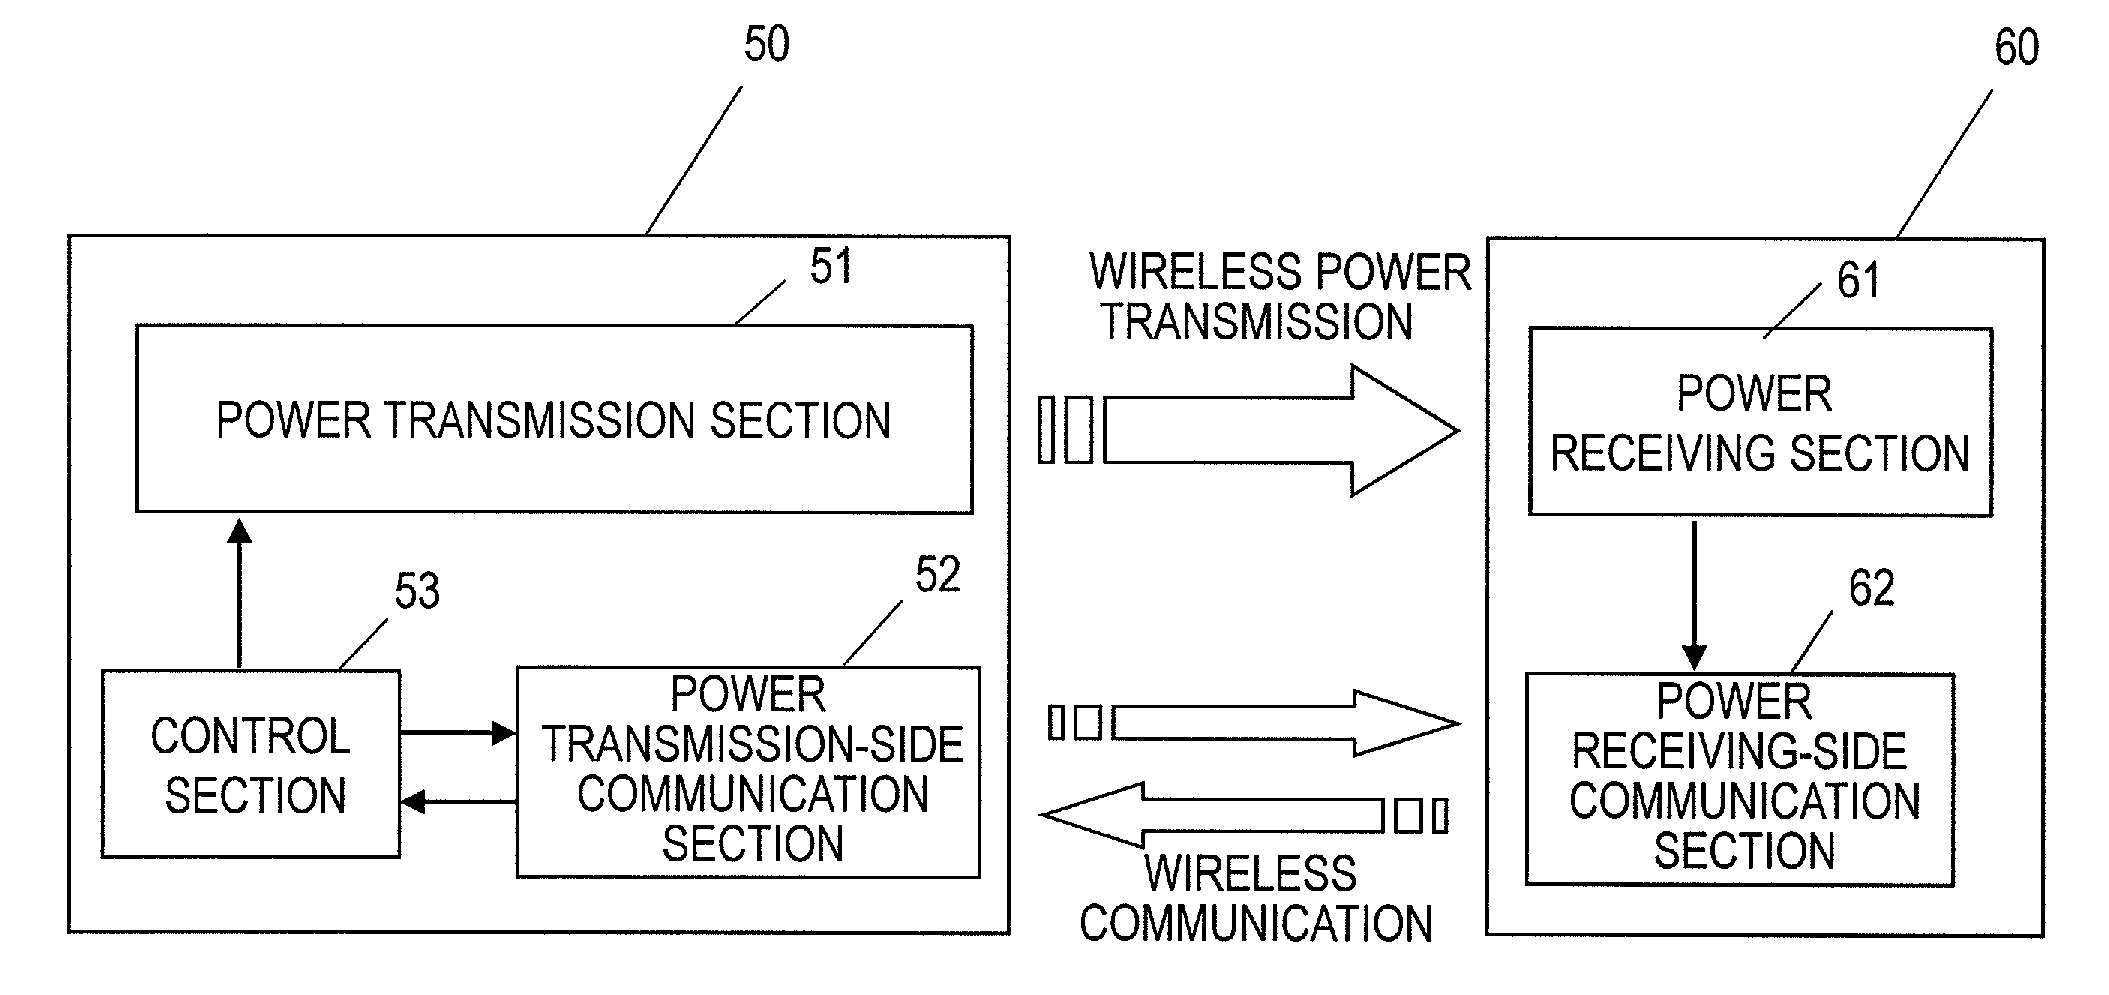 Power transmitter and wireless power transmission system